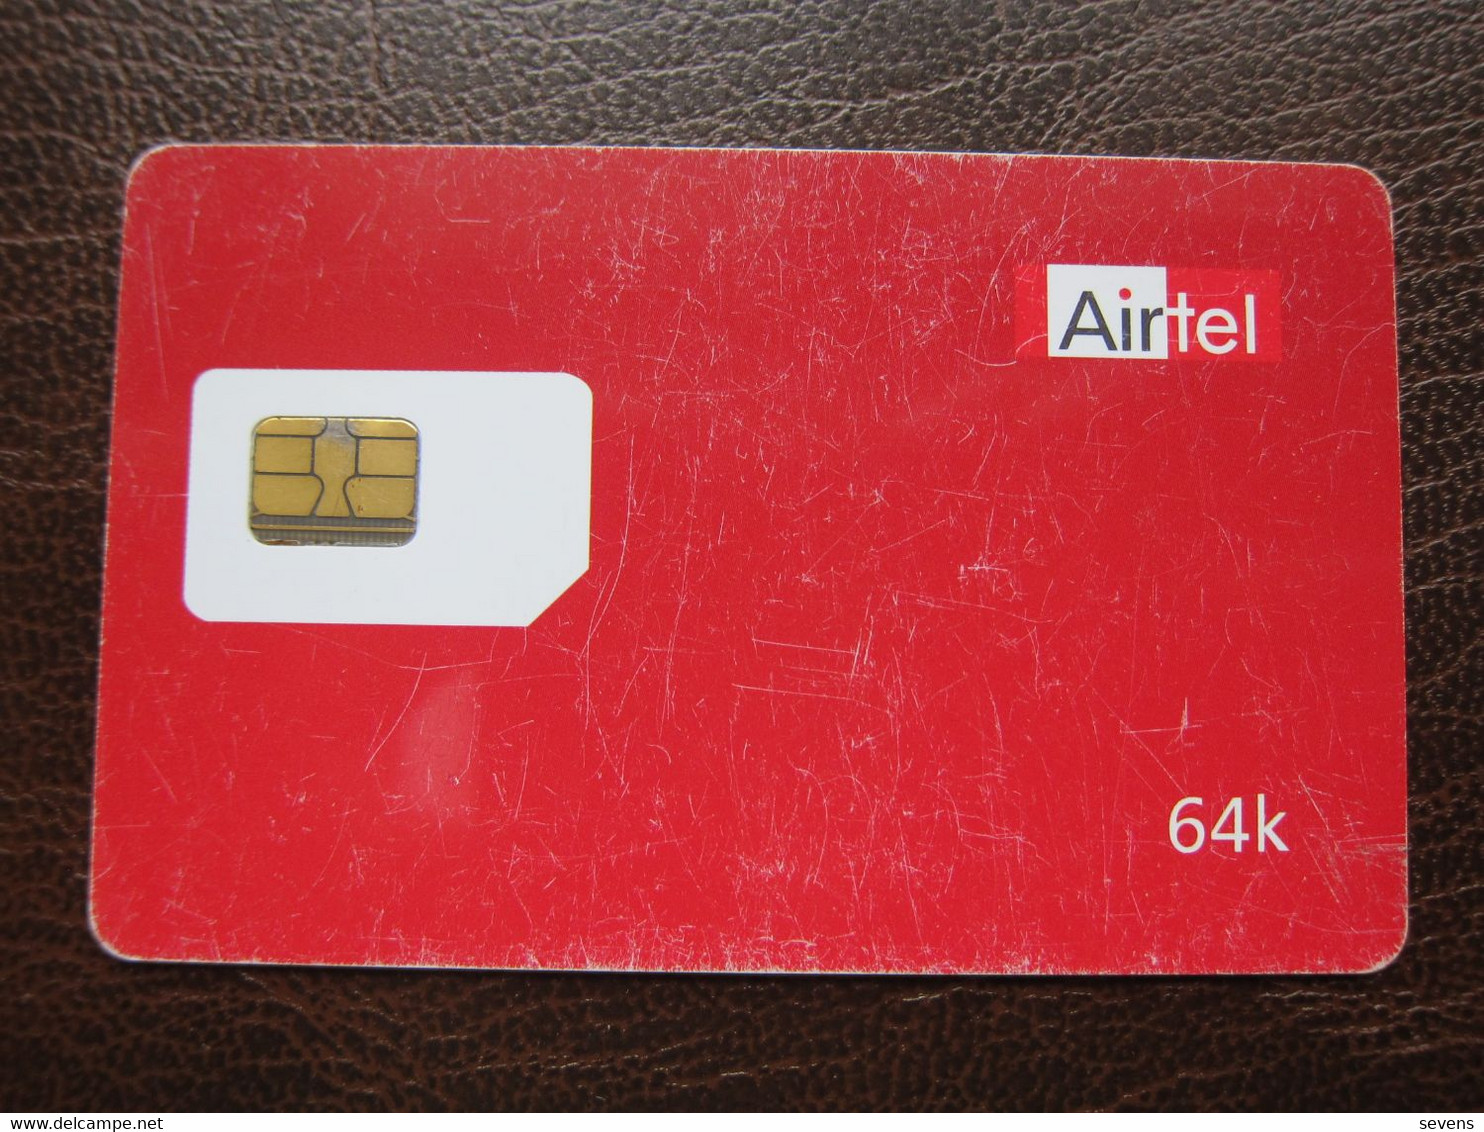 Airtel 64K GSM SIM Card, Sample Card Without Account Number, With Scratchs, Chip Moudle Wrong Cut - India